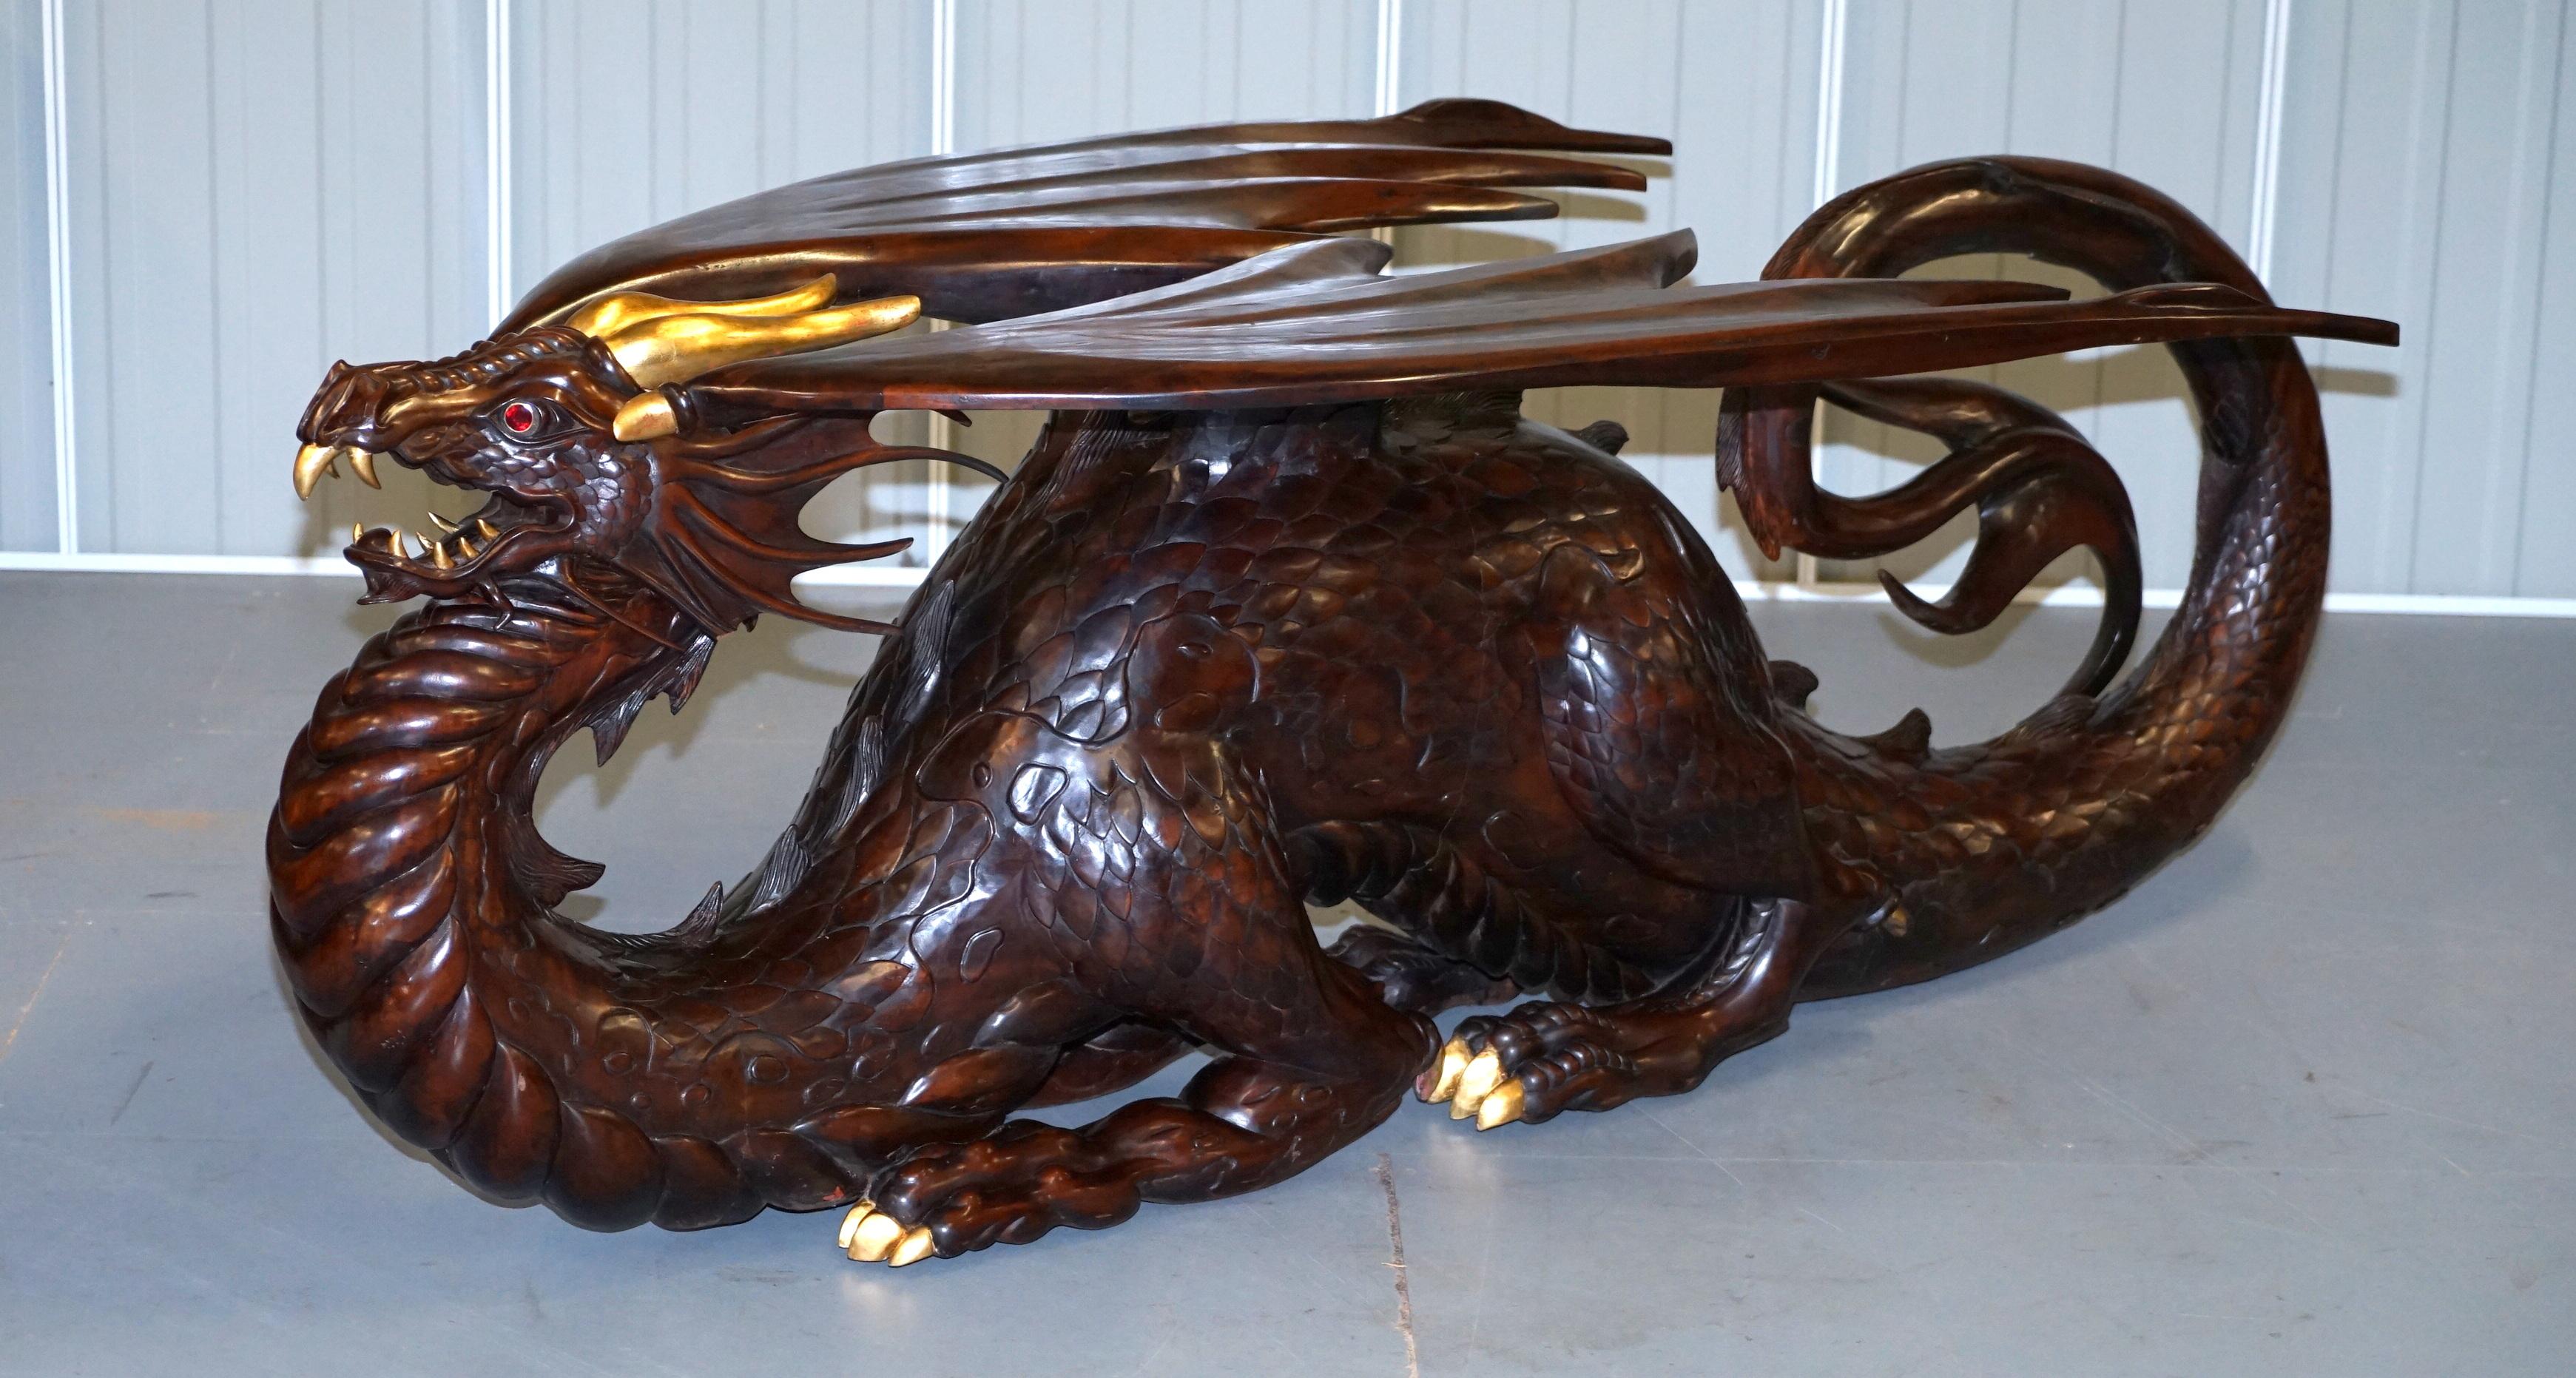 We are delighted to offer for sale this one of a kind original Neil Busby solid mahogany Dragon dining table with 22-carat gold detailing and huge Ruby eyes 

I have the matching, again one of a kind suite of 12 Dragon dining chairs which has the